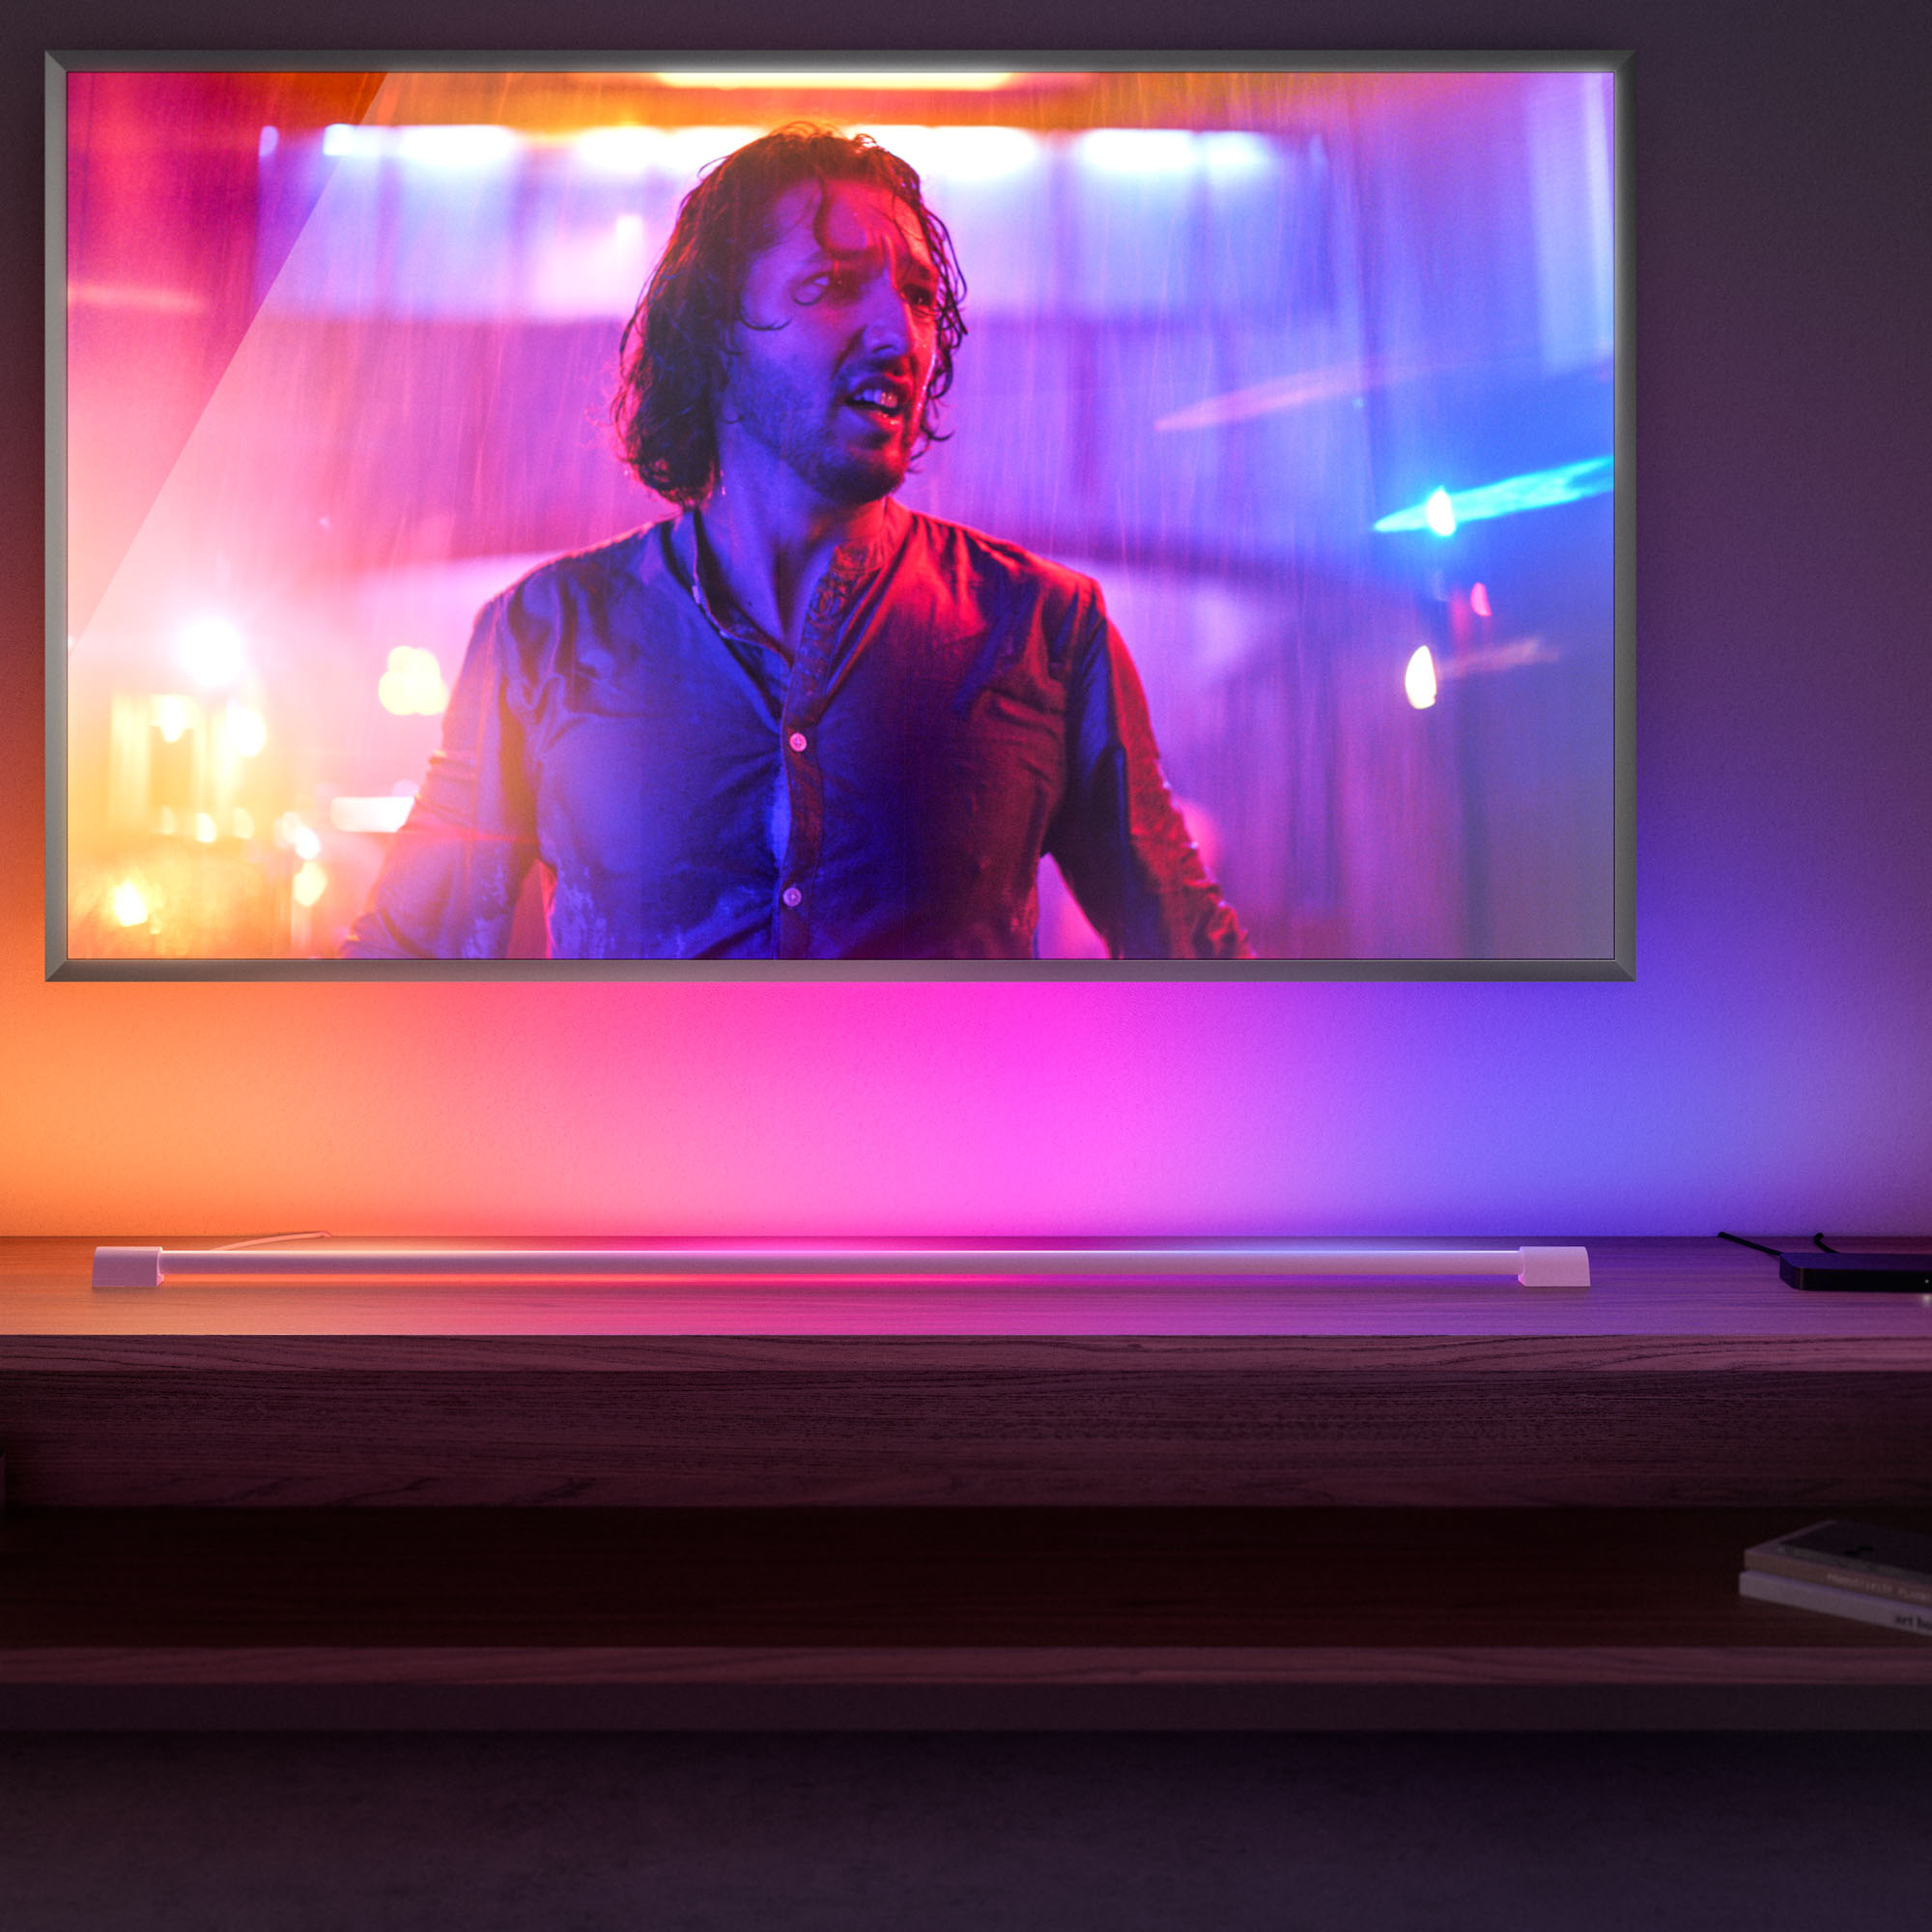 Philips Hue Play review: This versatile bias lighting kit syncs